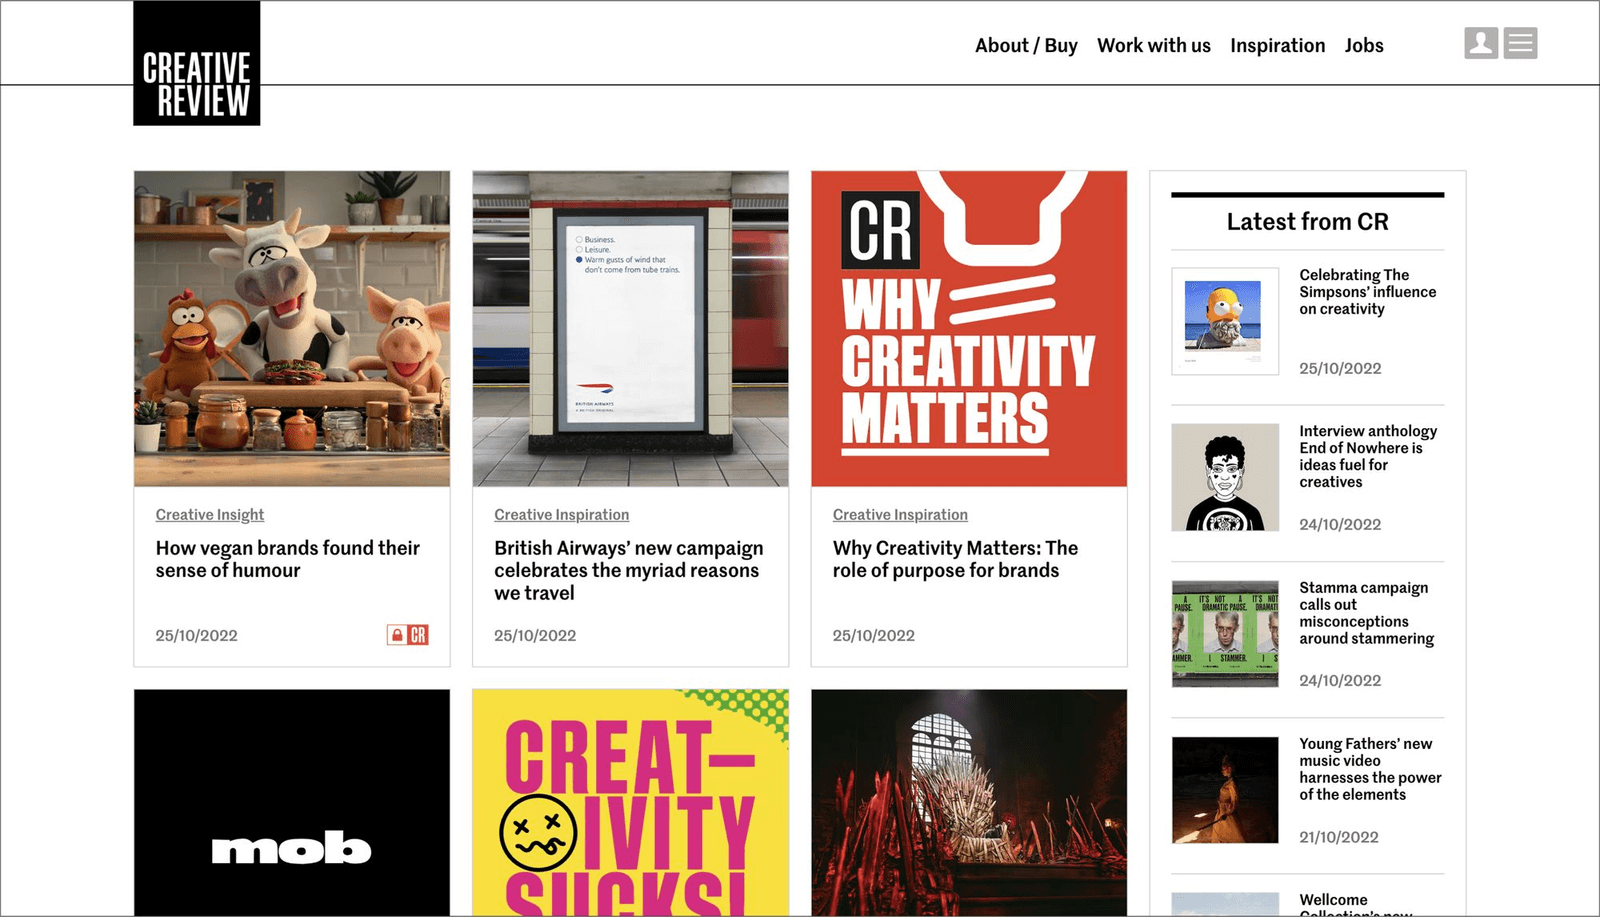 https://www.creativereview.co.uk/